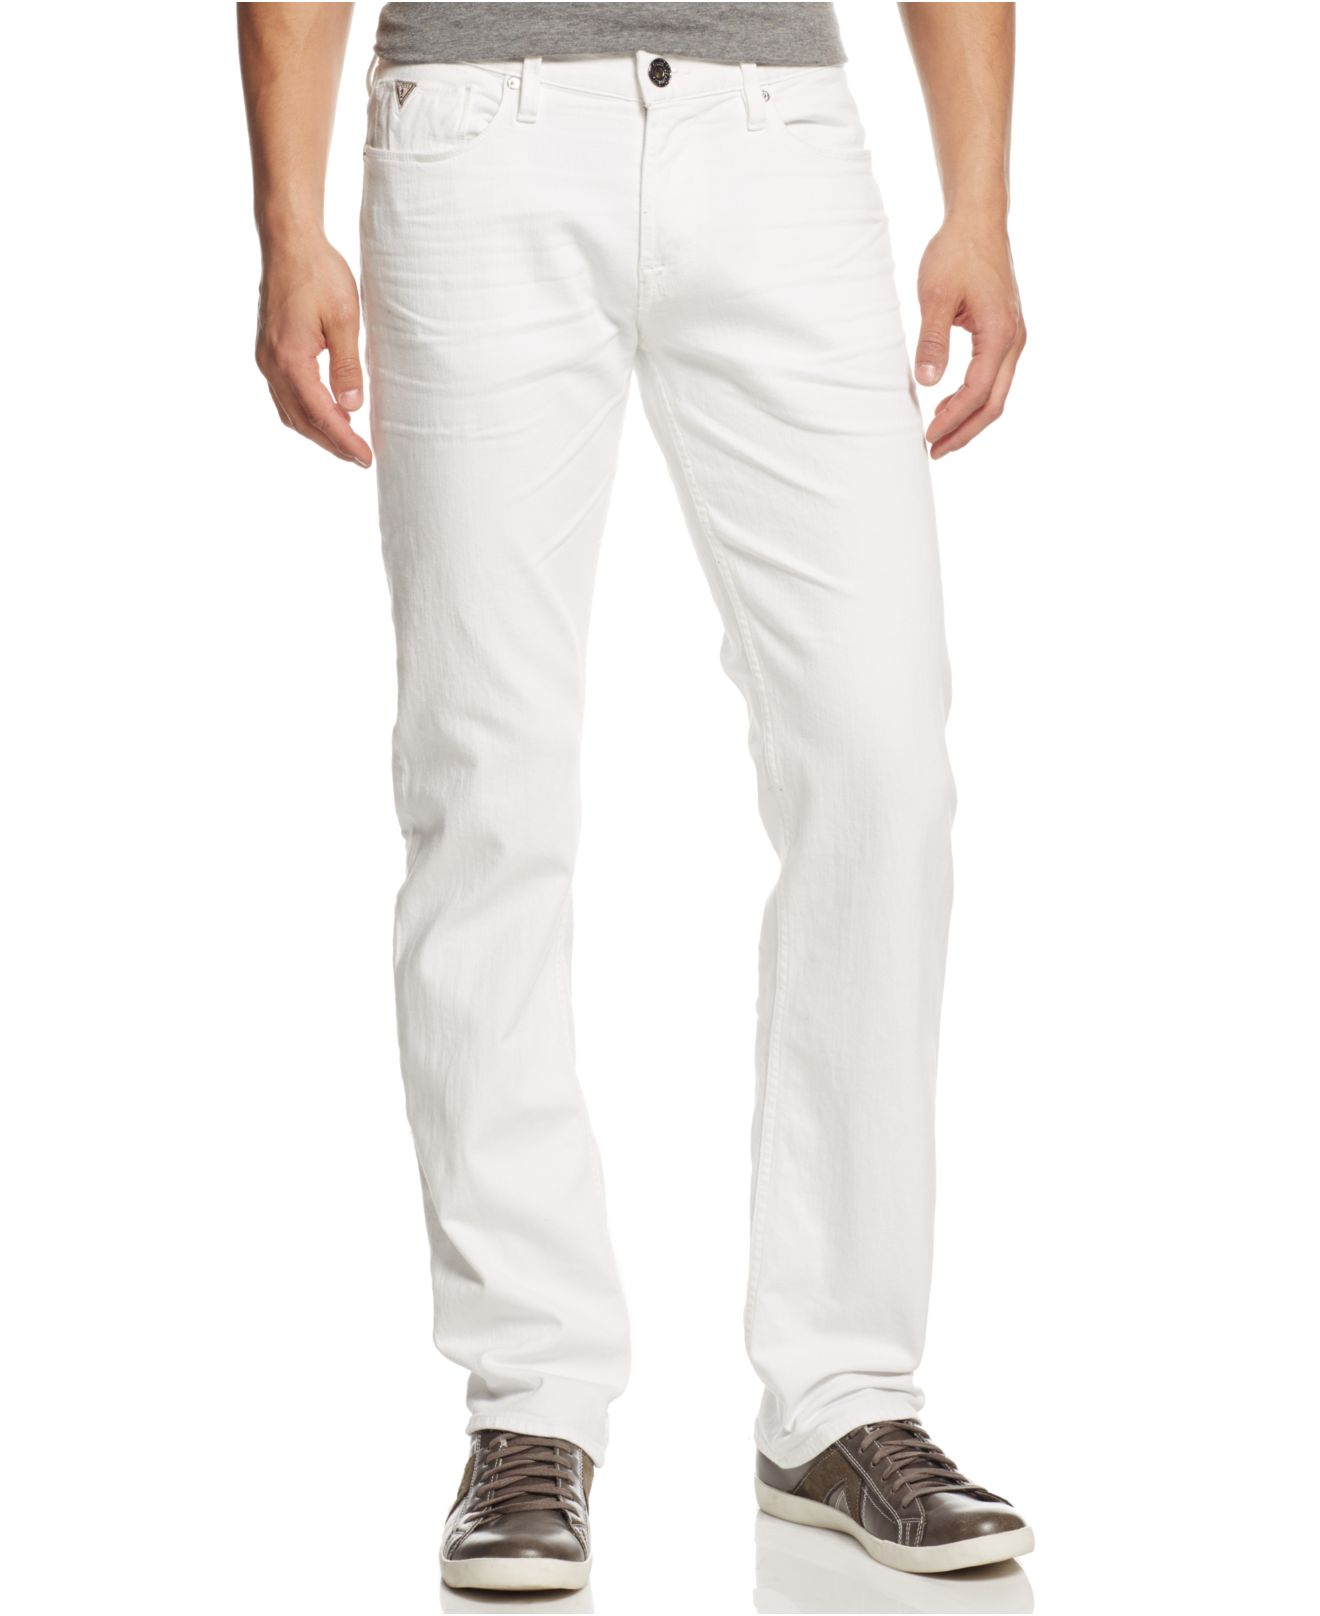 Lyst - Guess Slim-straight White Jeans in White for Men